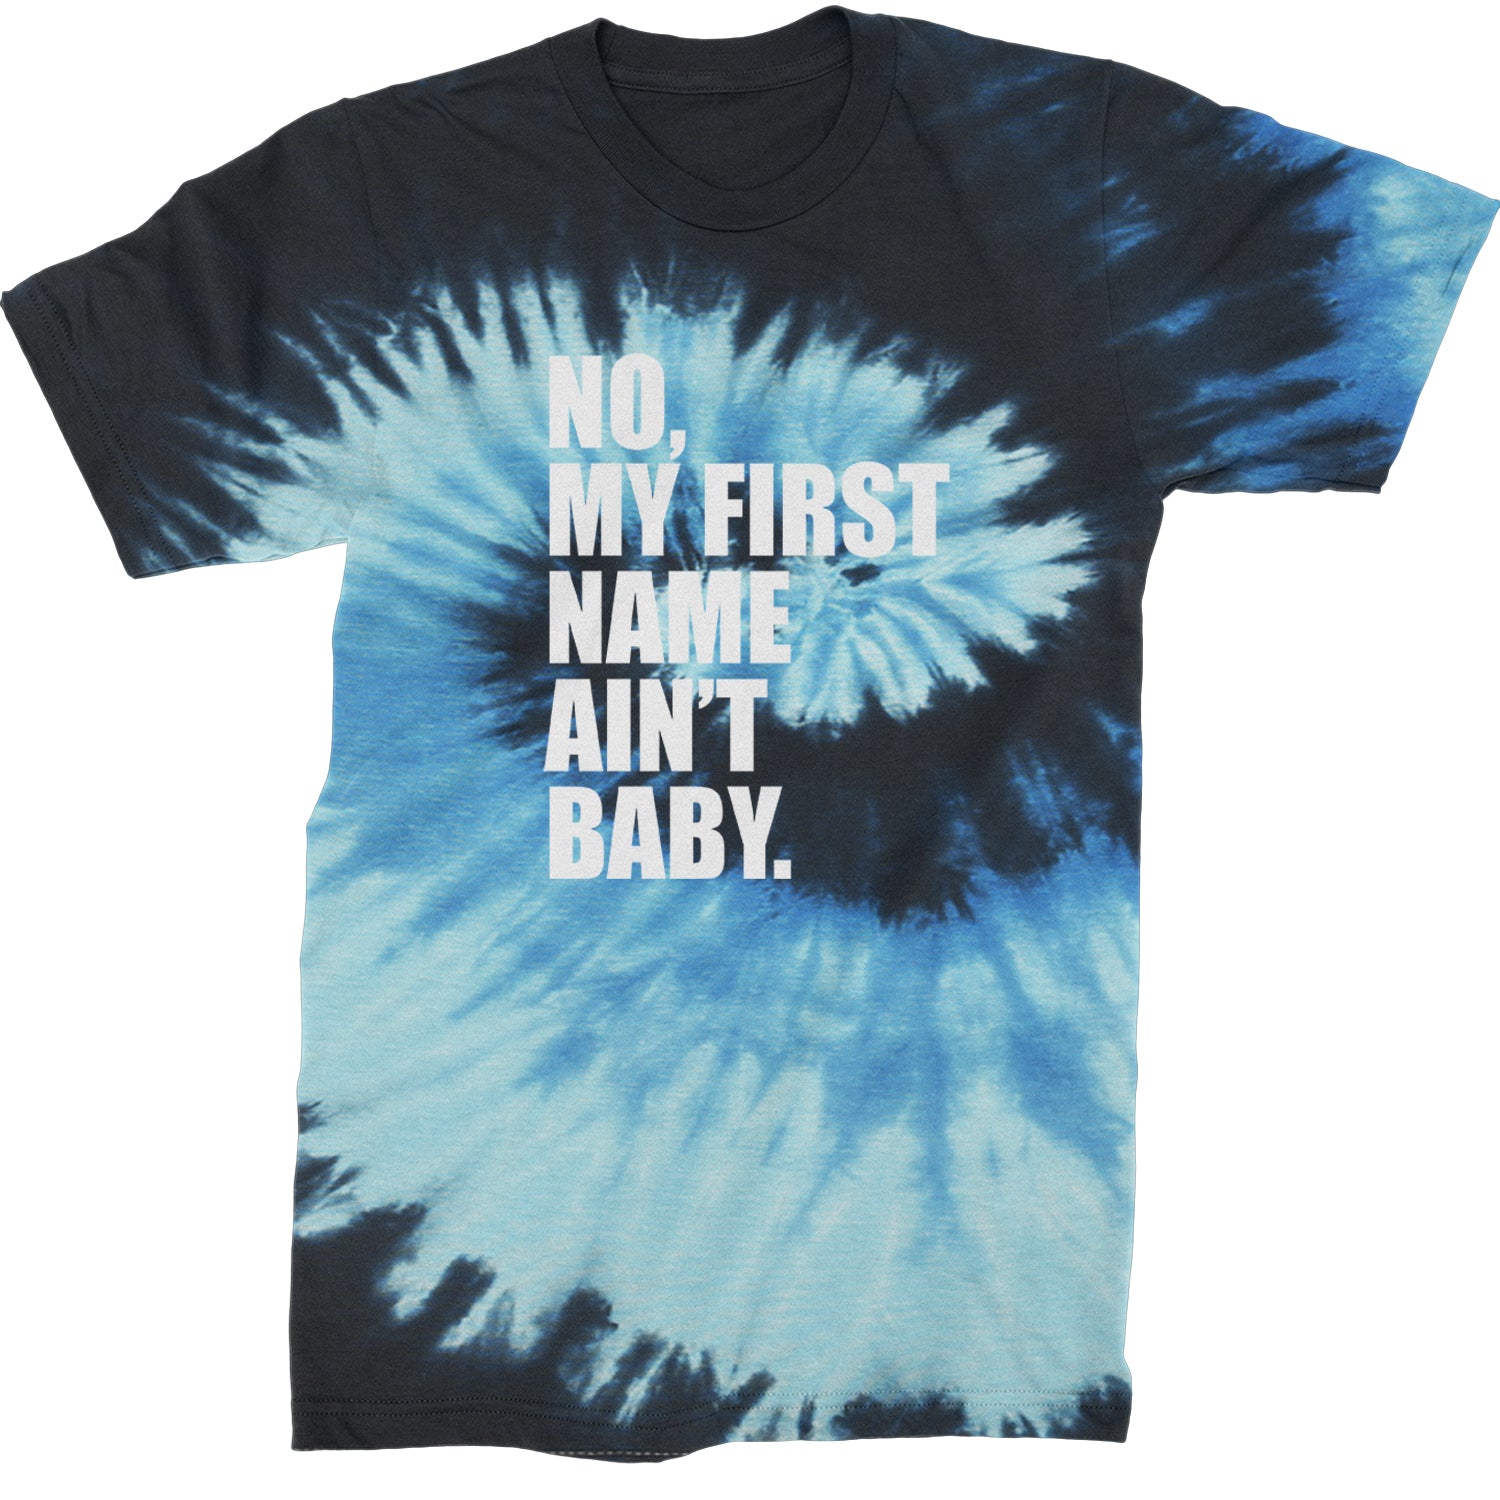 No My First Name Ain't Baby Together Again Mens T-shirt Tie-Dye Blue Ocean